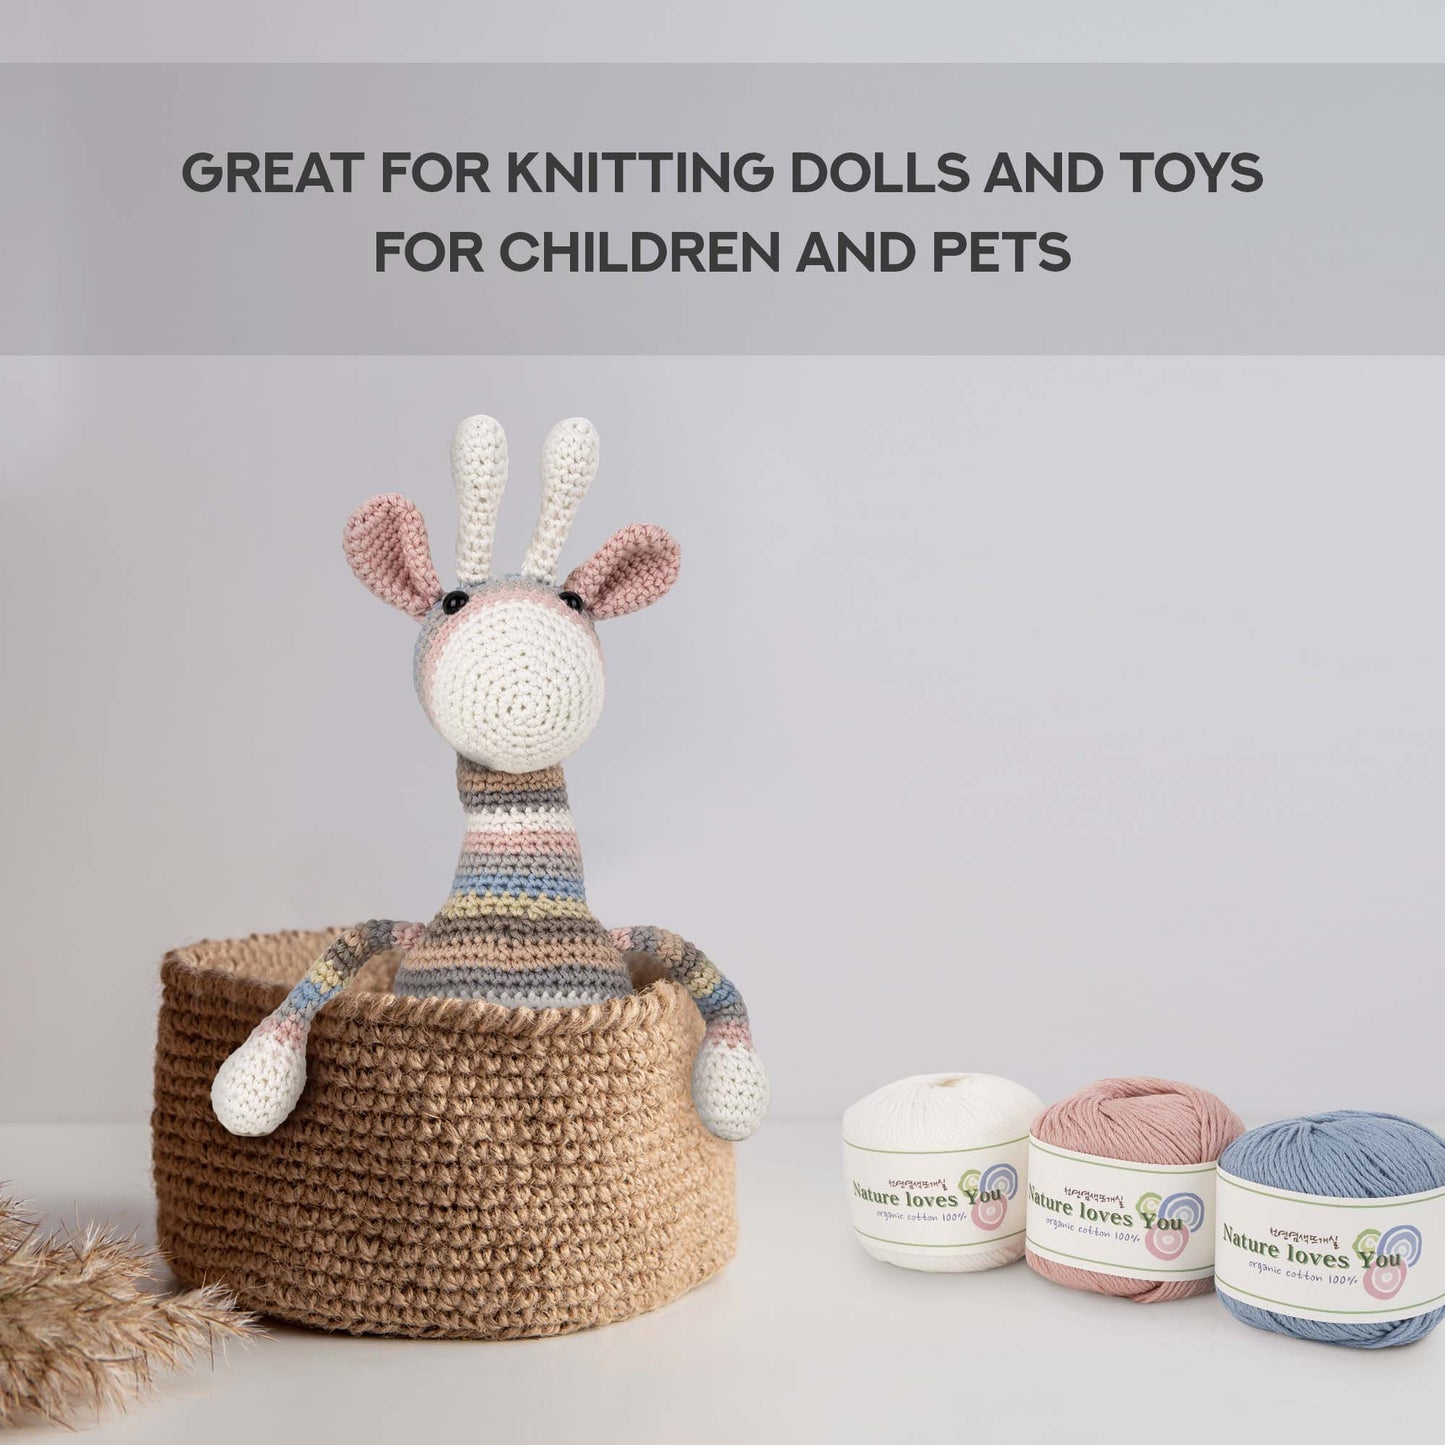 Great for knitting dolls and toys for baby, children and pets